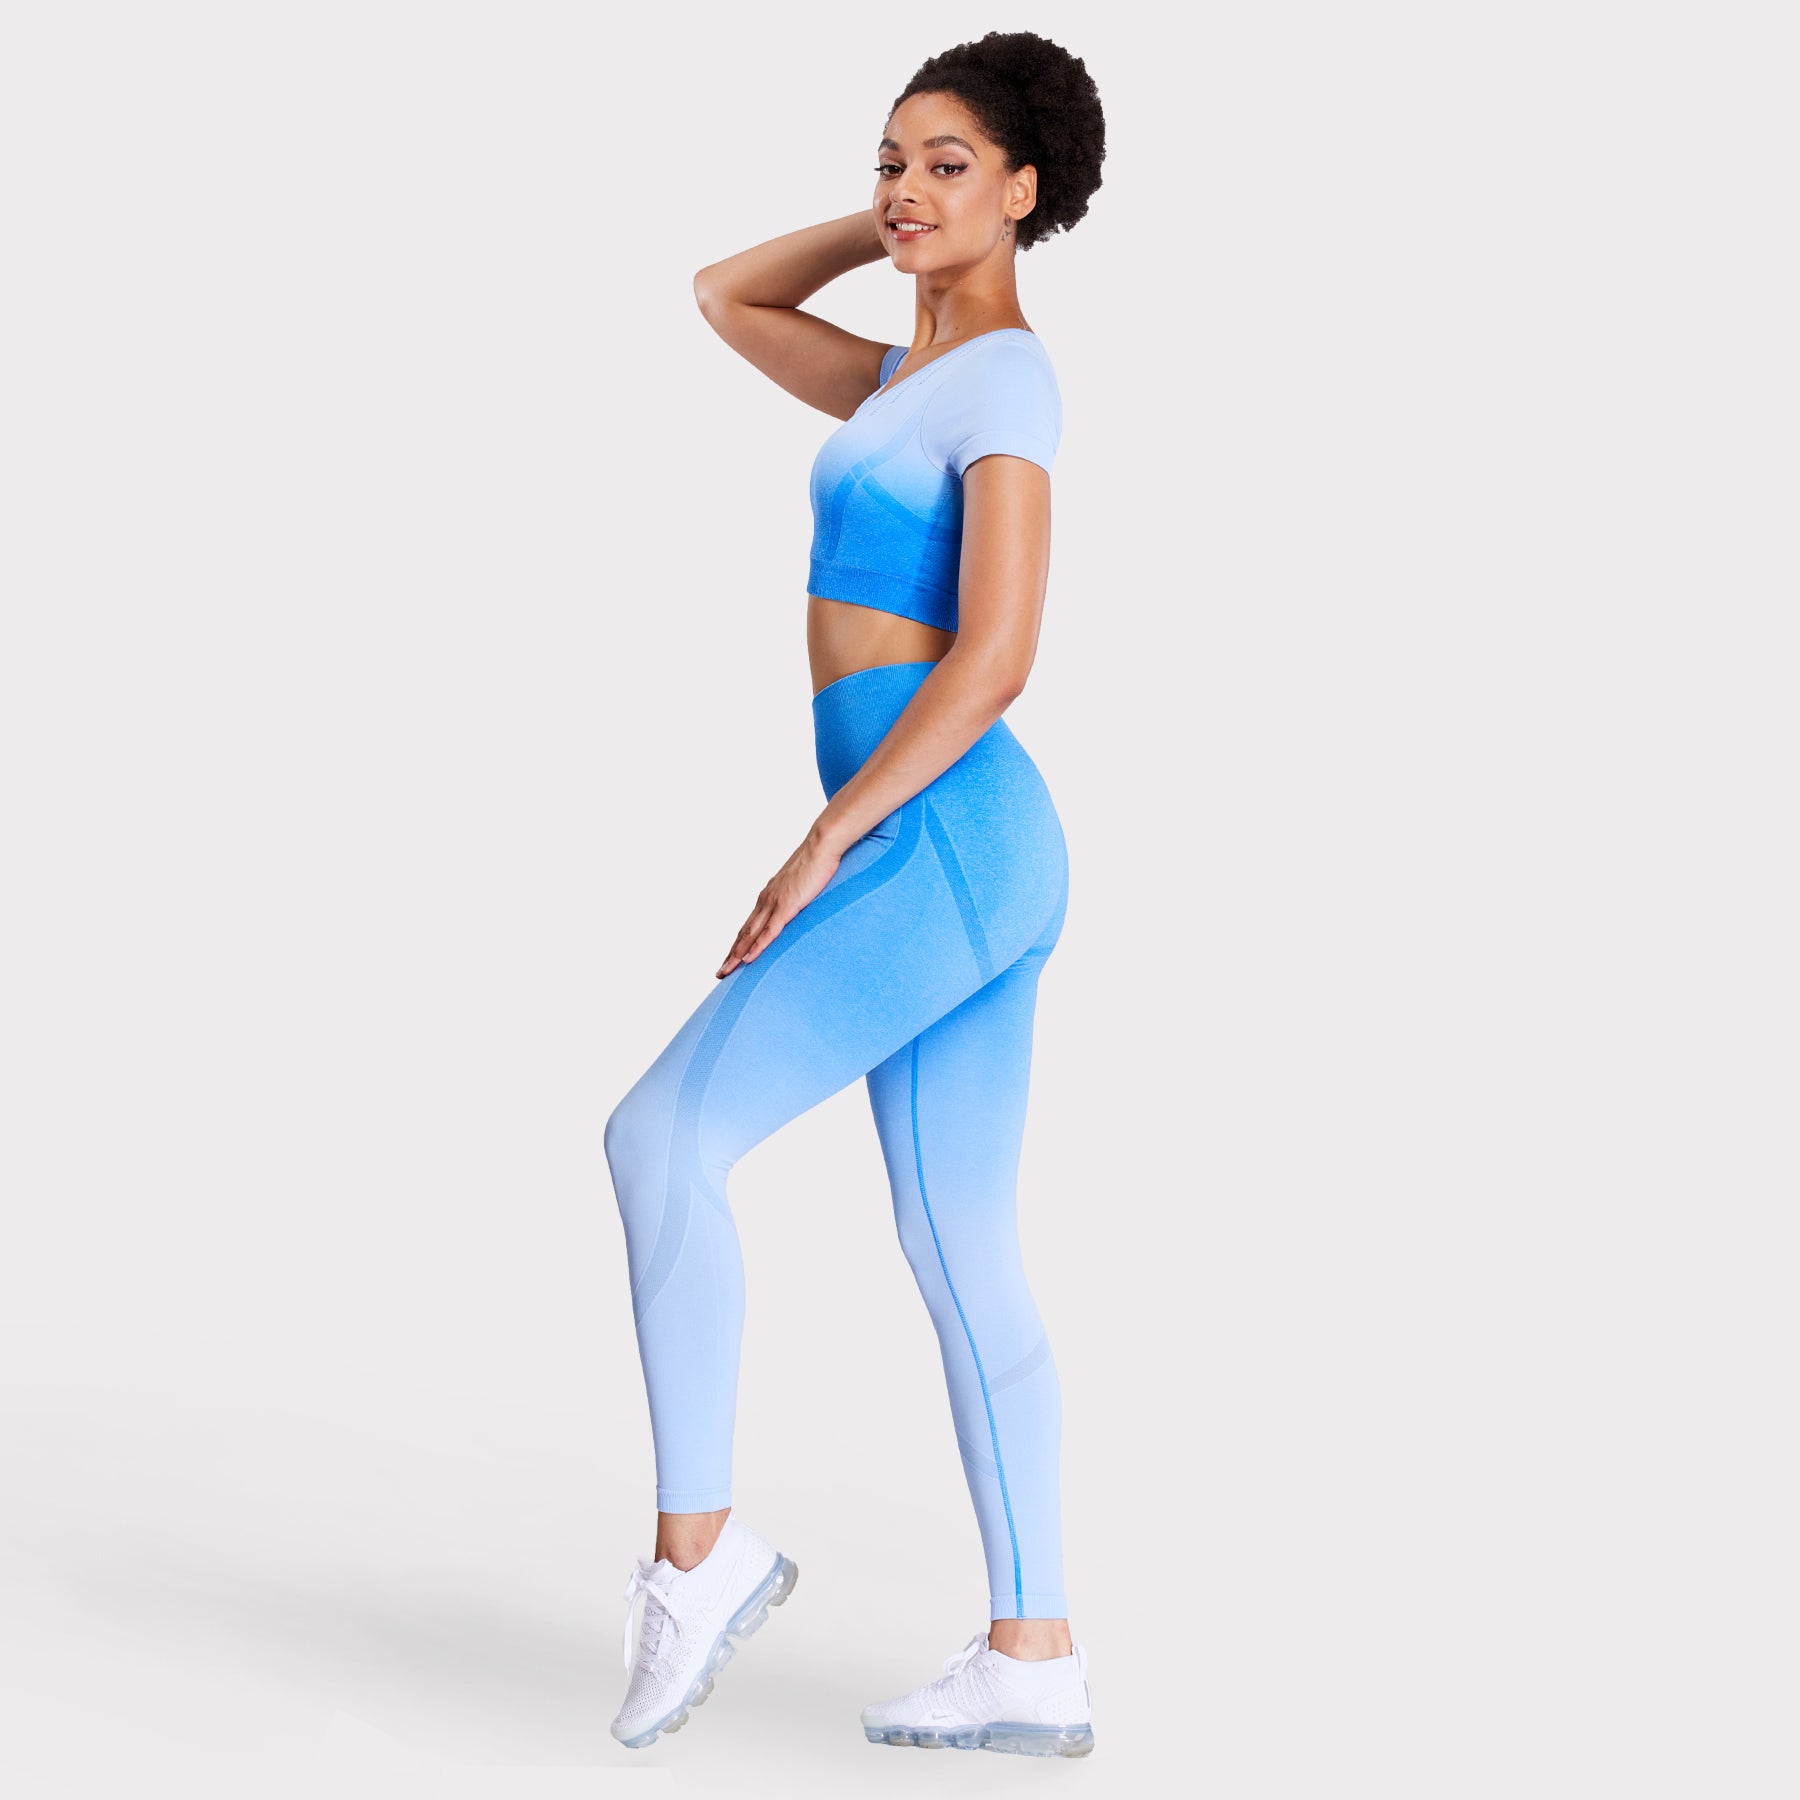 Aoxjox Leggings & Women's Activewear for WAY LESS!